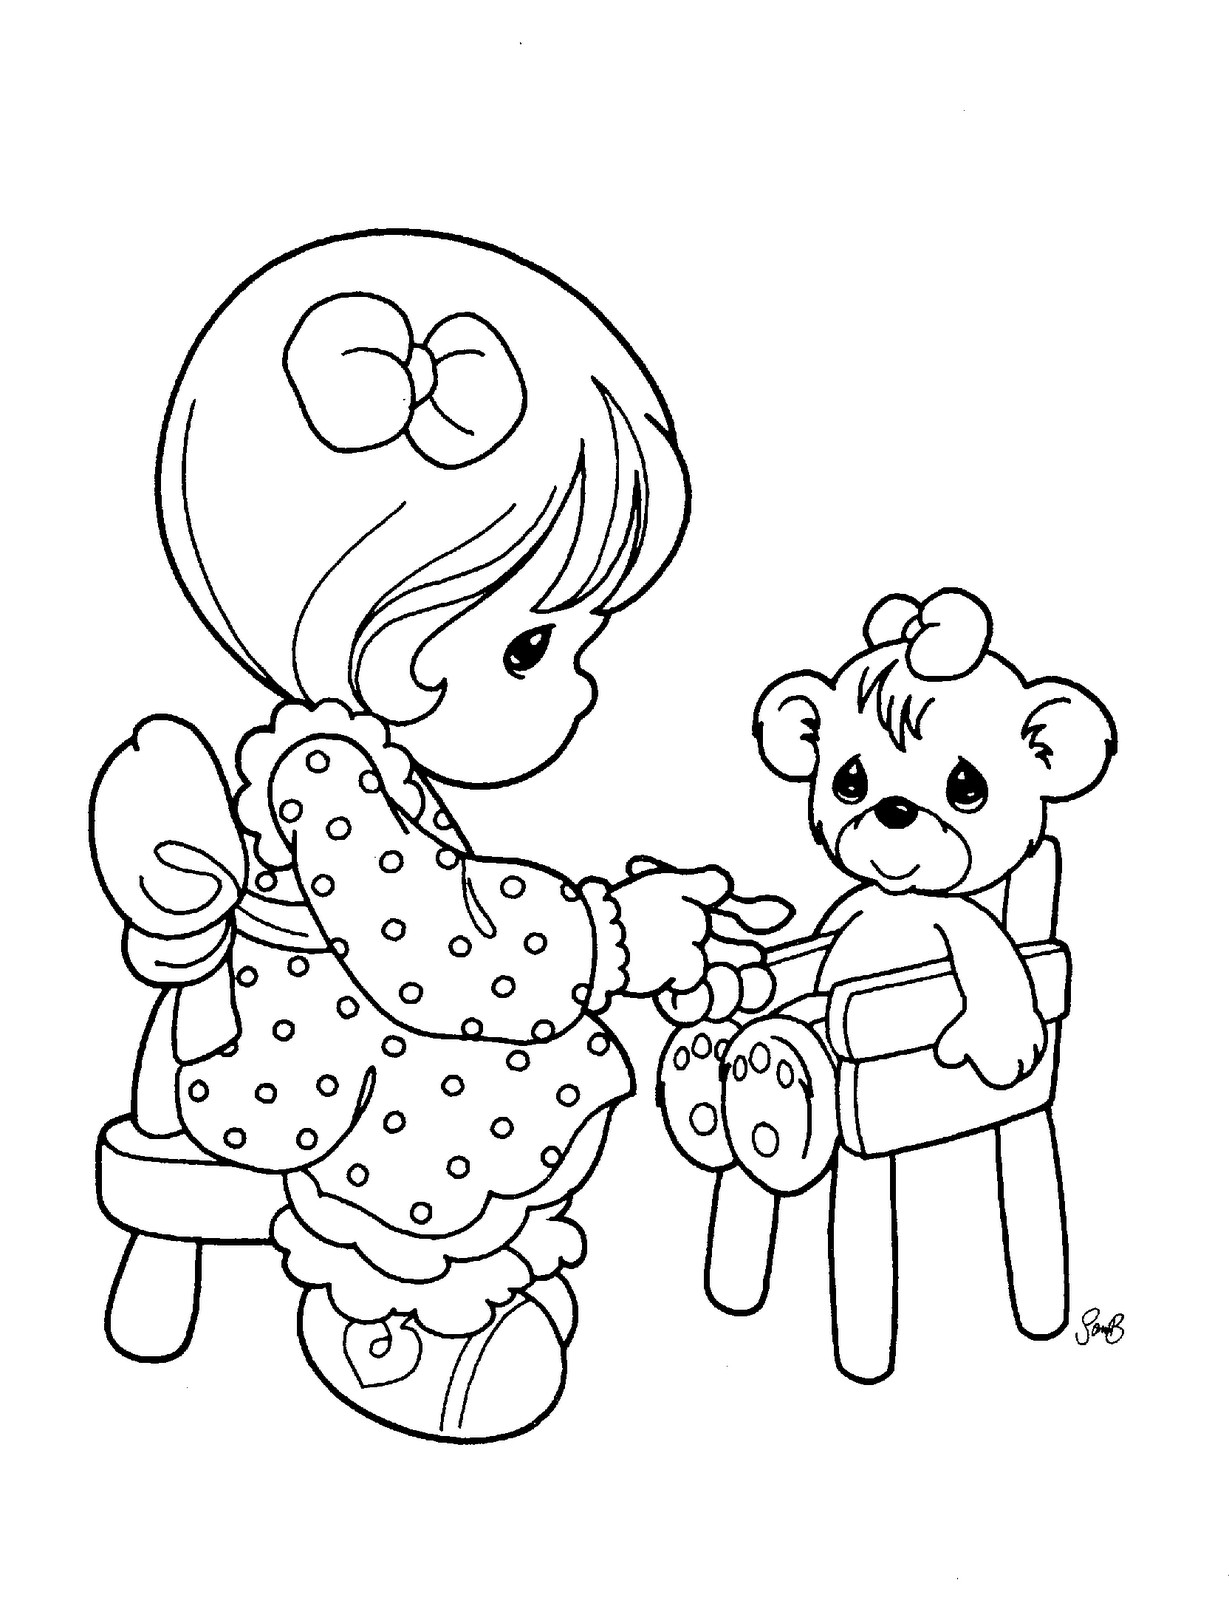 Precious Moments Printable Coloring Pages
 Precious Moments for Love Coloring Pages Disney